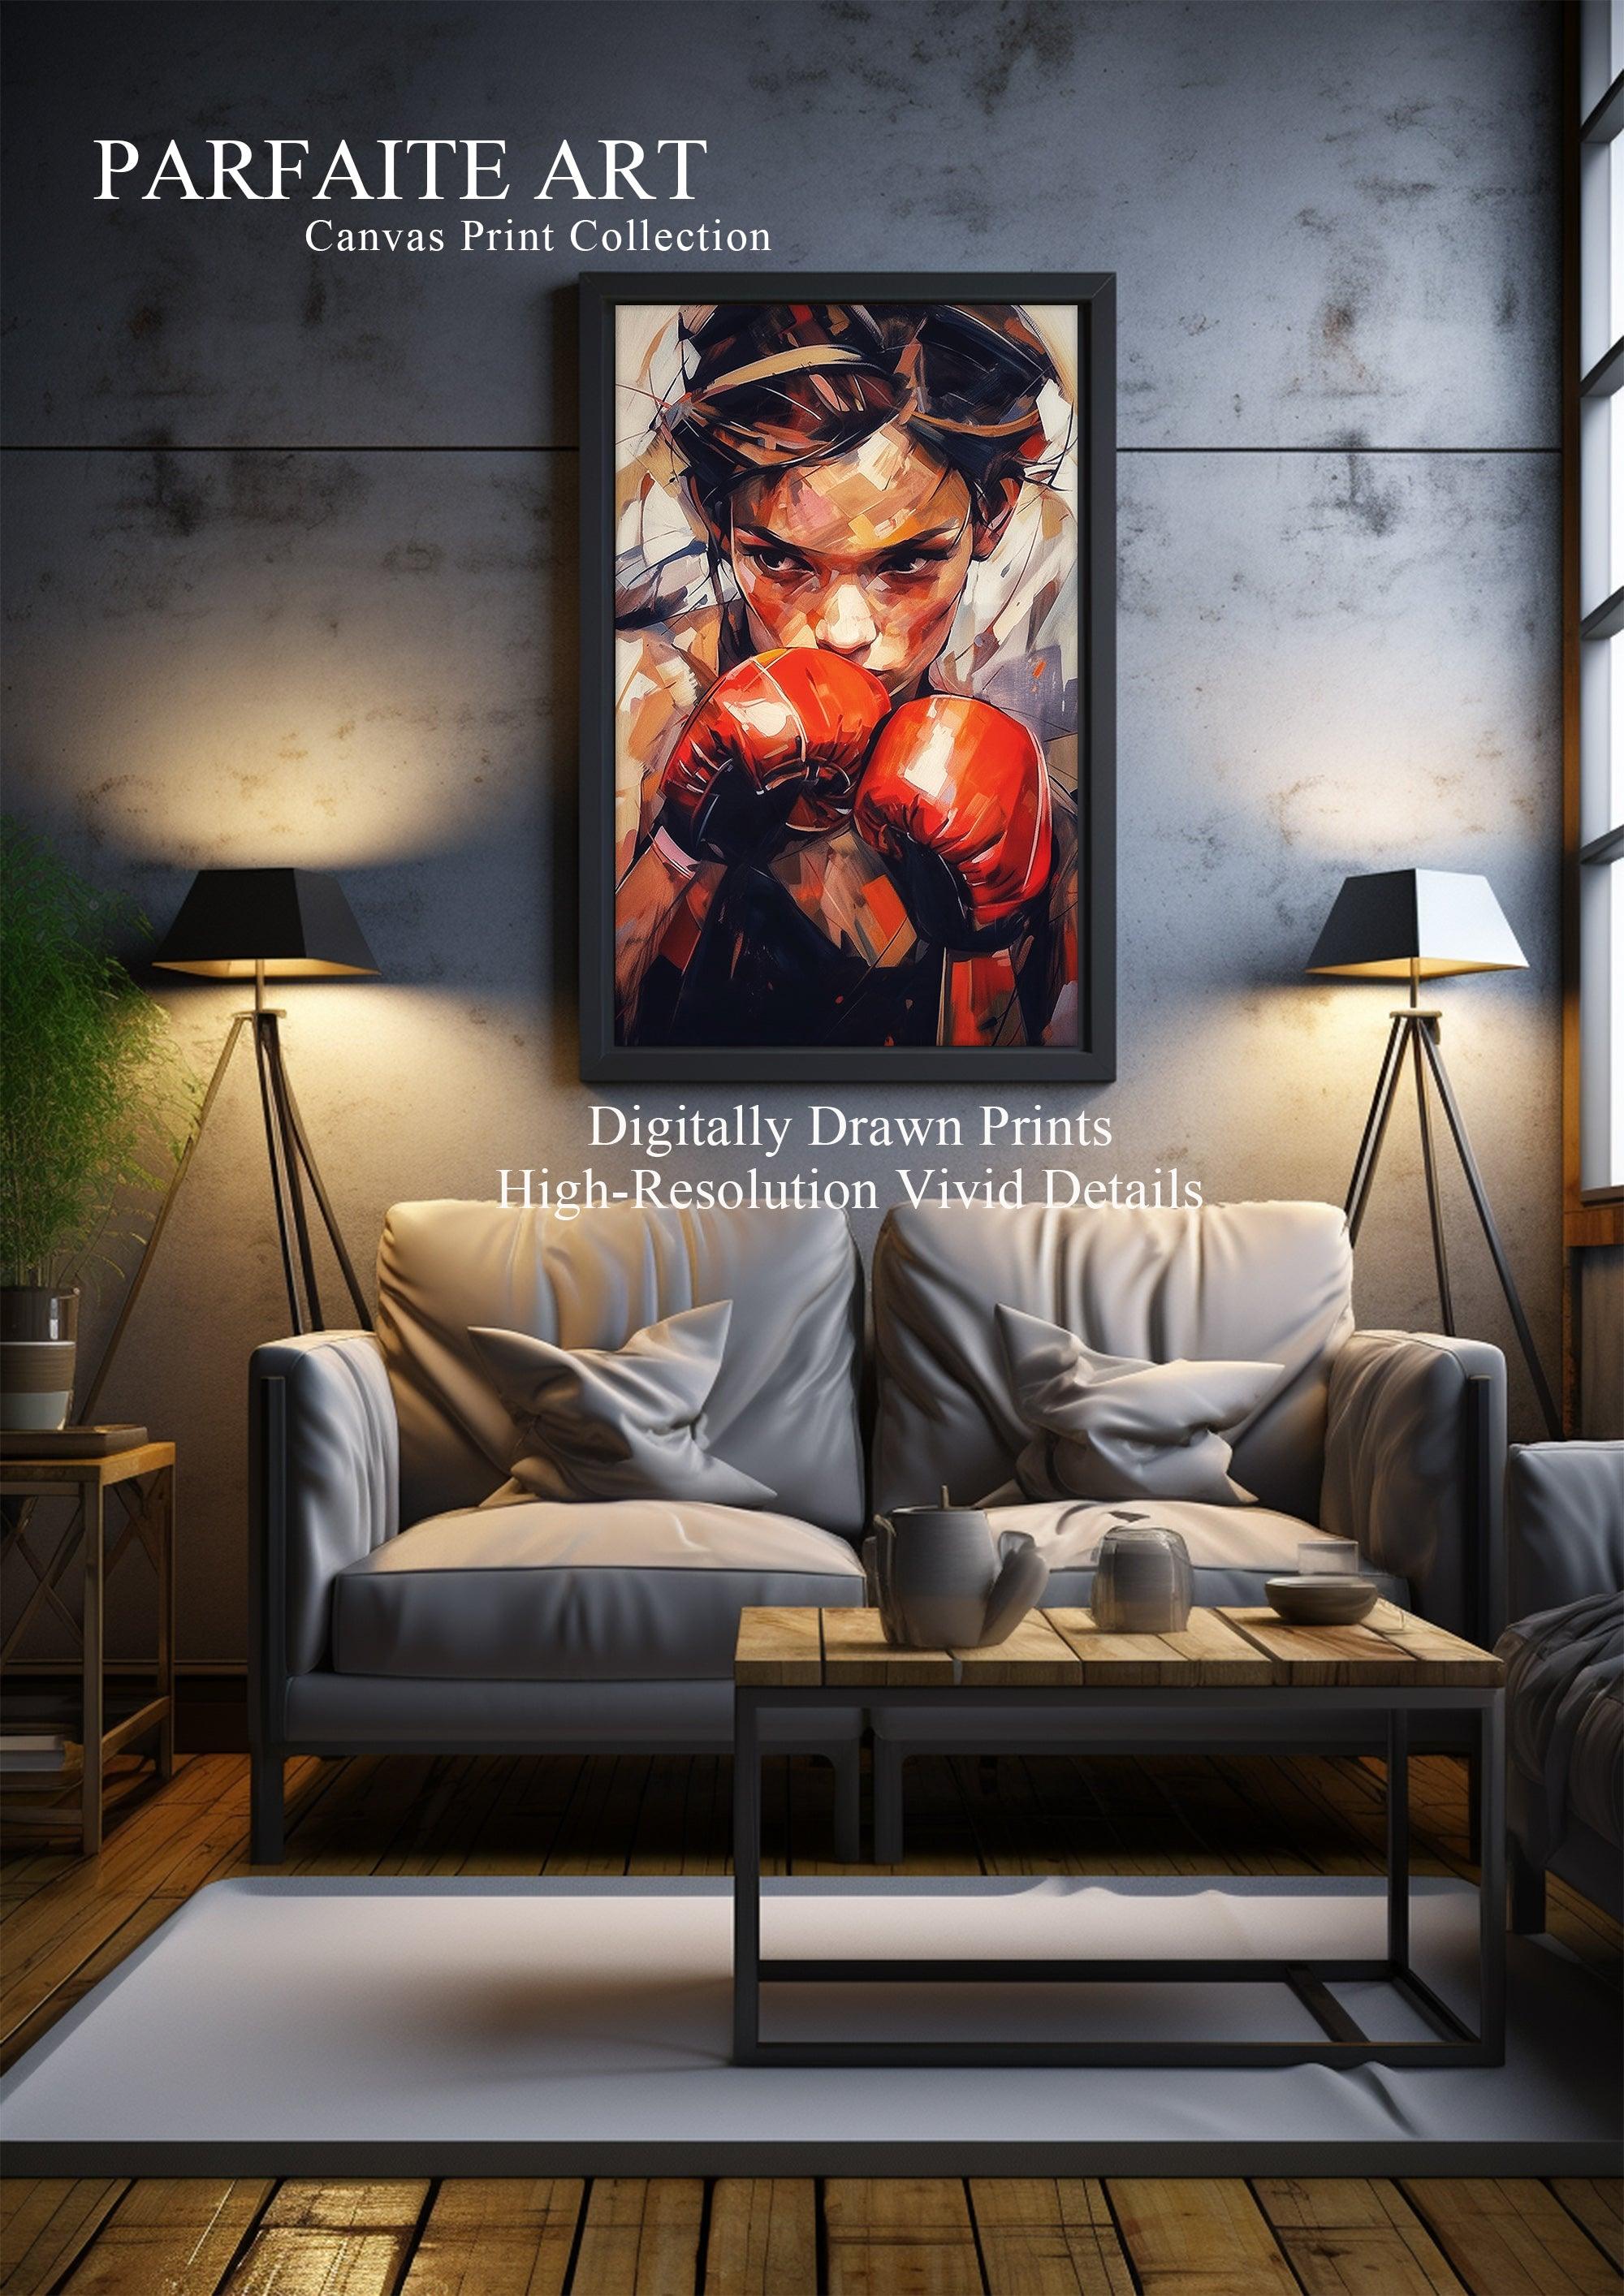 Female Boxers，Hand Painted Colorful Decorative Canvas Artwork，Moody Wall Decor，Cotton Gloss Canvas Living Room Decor，High-Quality Waterproof Decorative Canvas Art